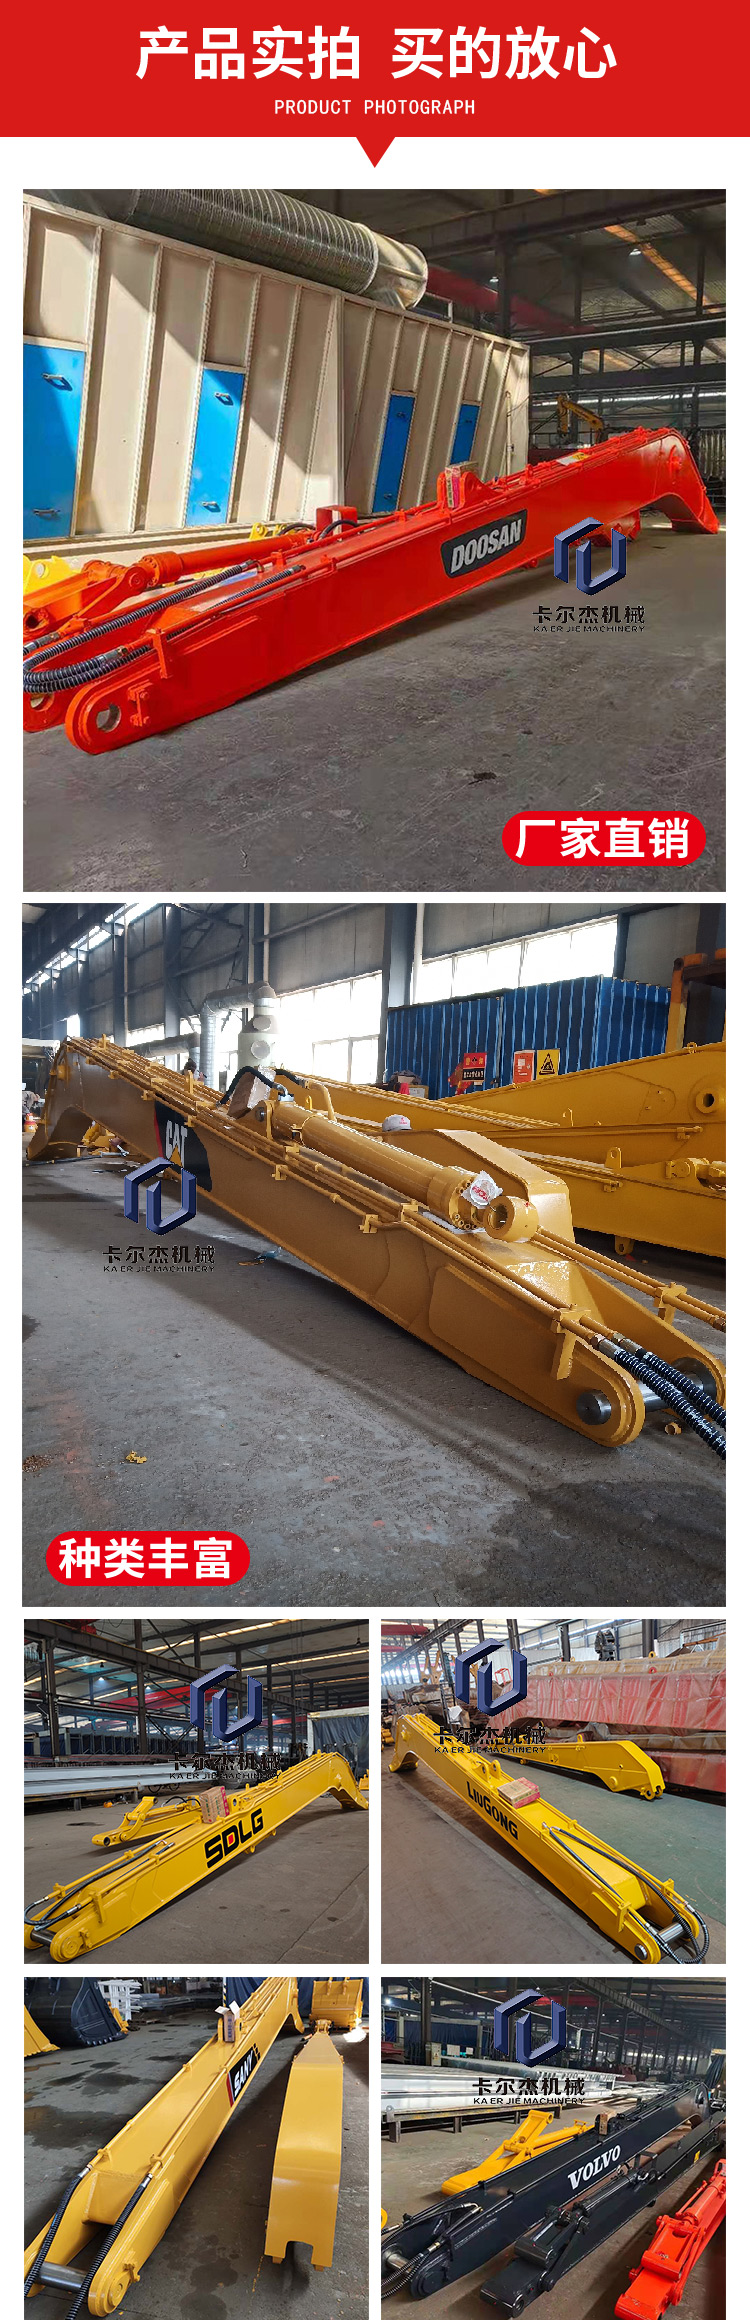 Excavator with extended arm of 20 meters Excavator with extended arm River dredging Excavator with extended arm